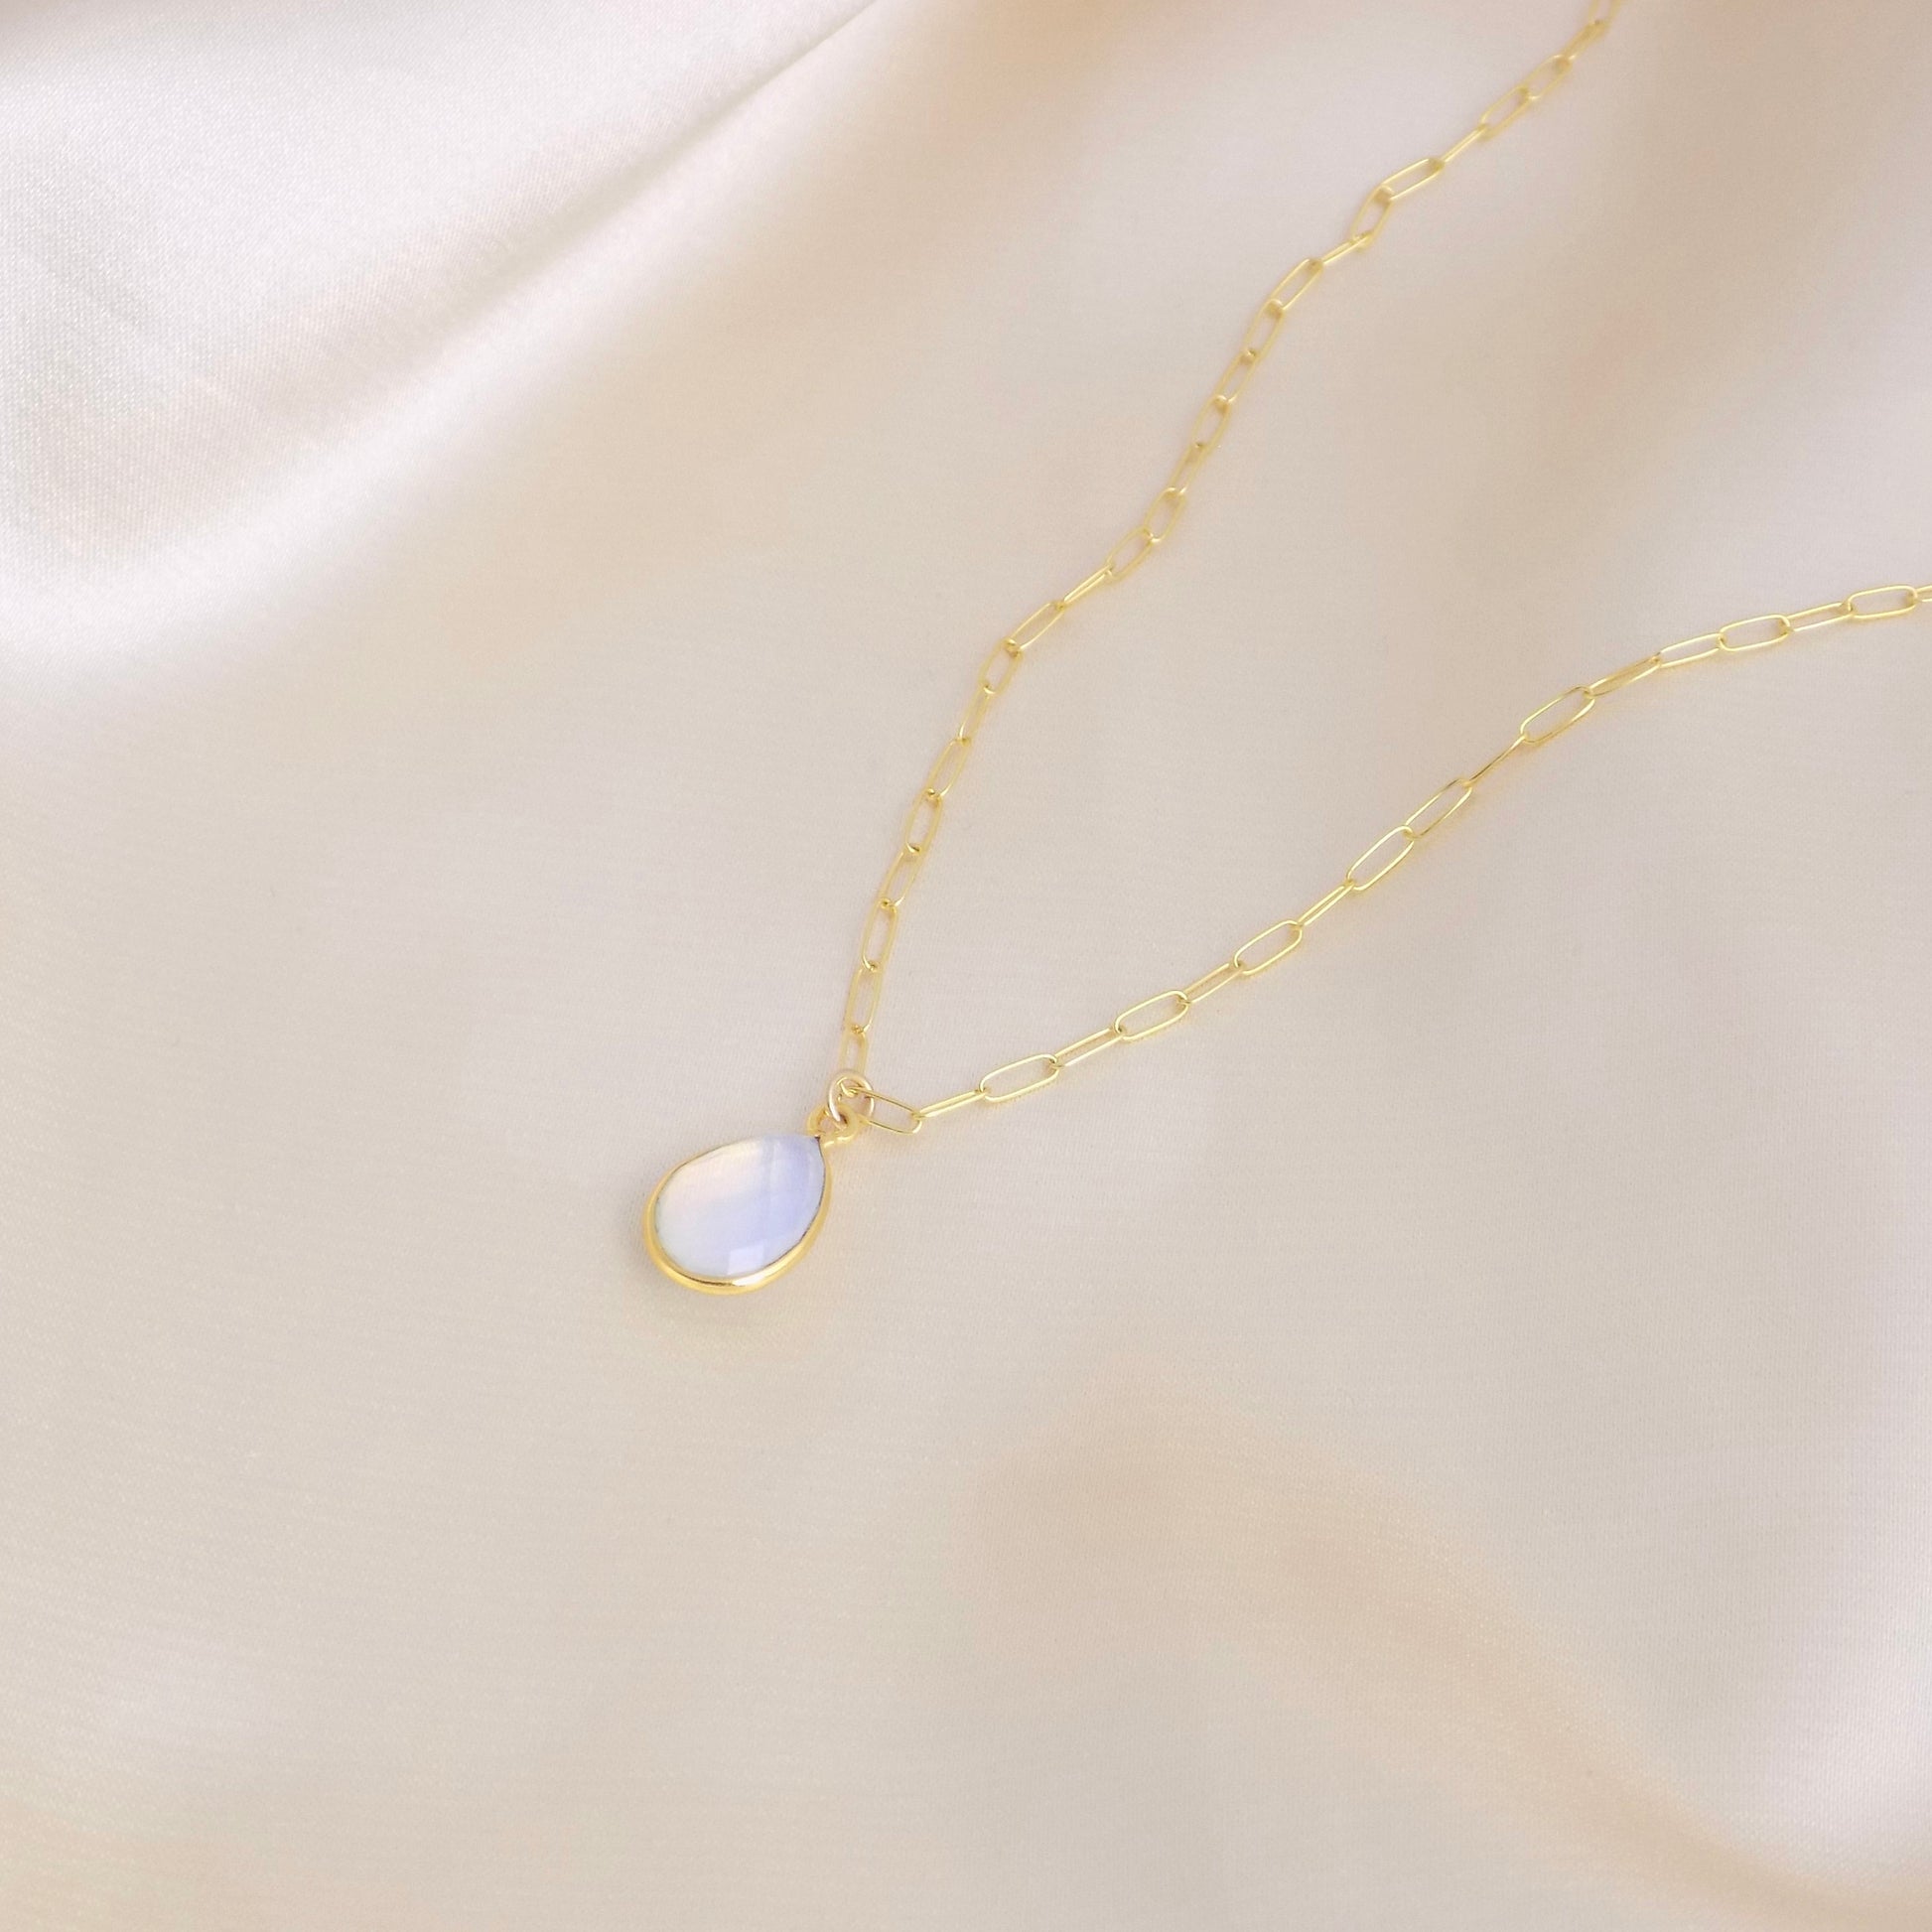 Unique Birthday Gift, Opal Necklace Gold, Paperclip Chain 14K Gold Filled, October Birthstone Jewelry, Gift For Best Friend, M6-95